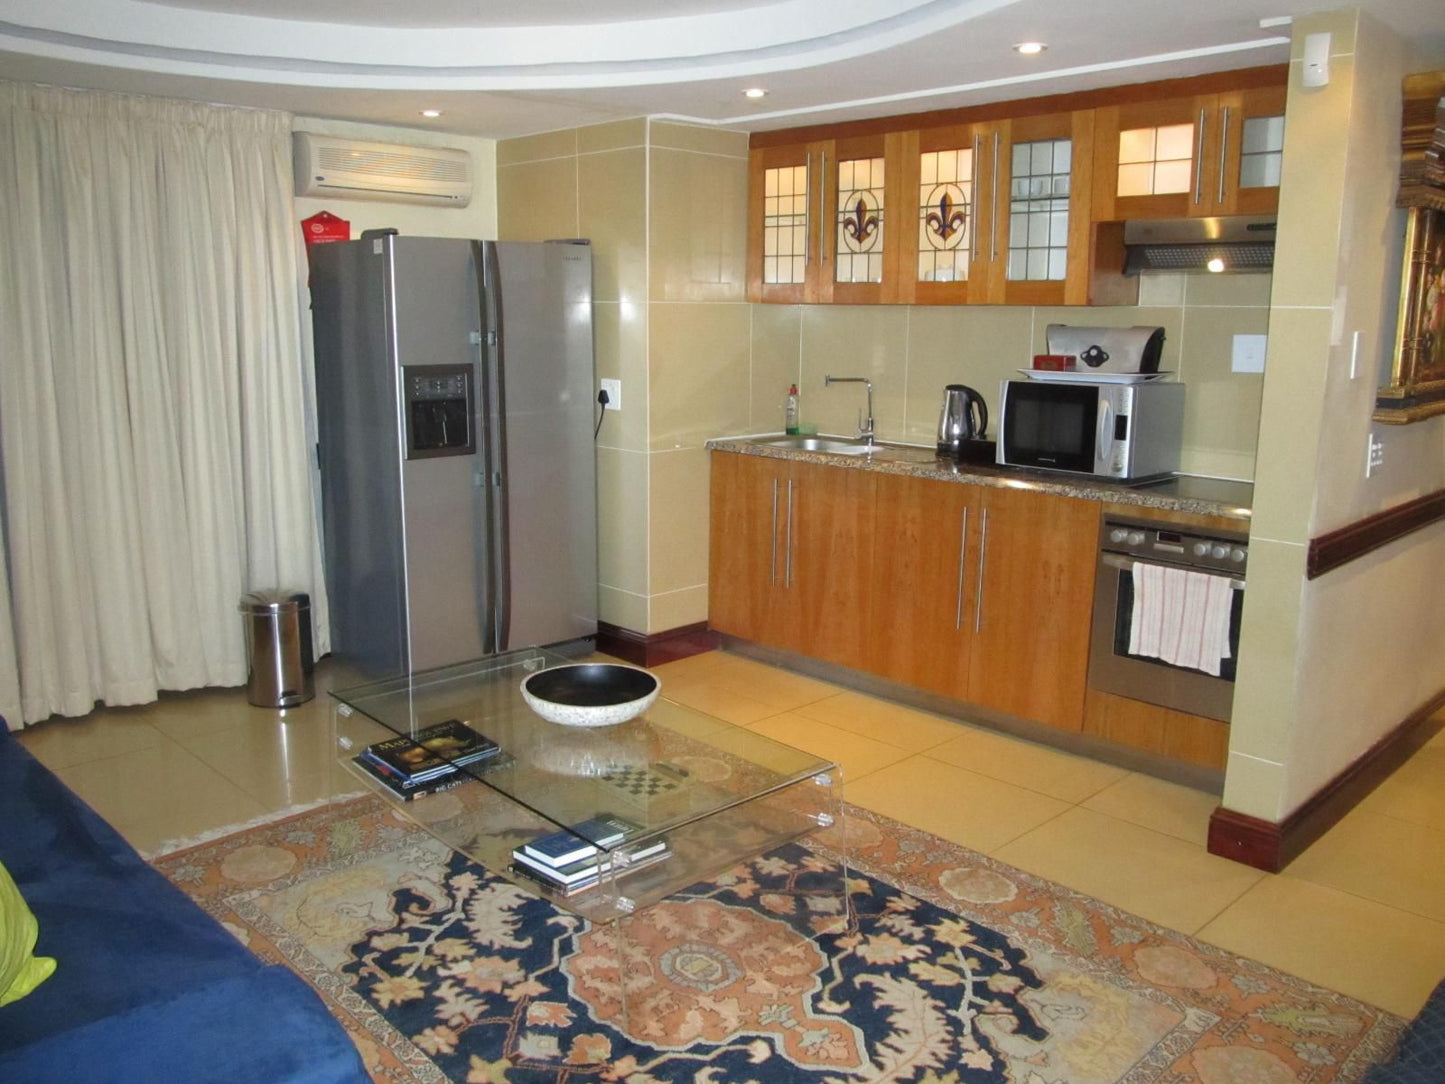 Kosmos Manor Guest House Hartbeespoort Dam Hartbeespoort North West Province South Africa Kitchen